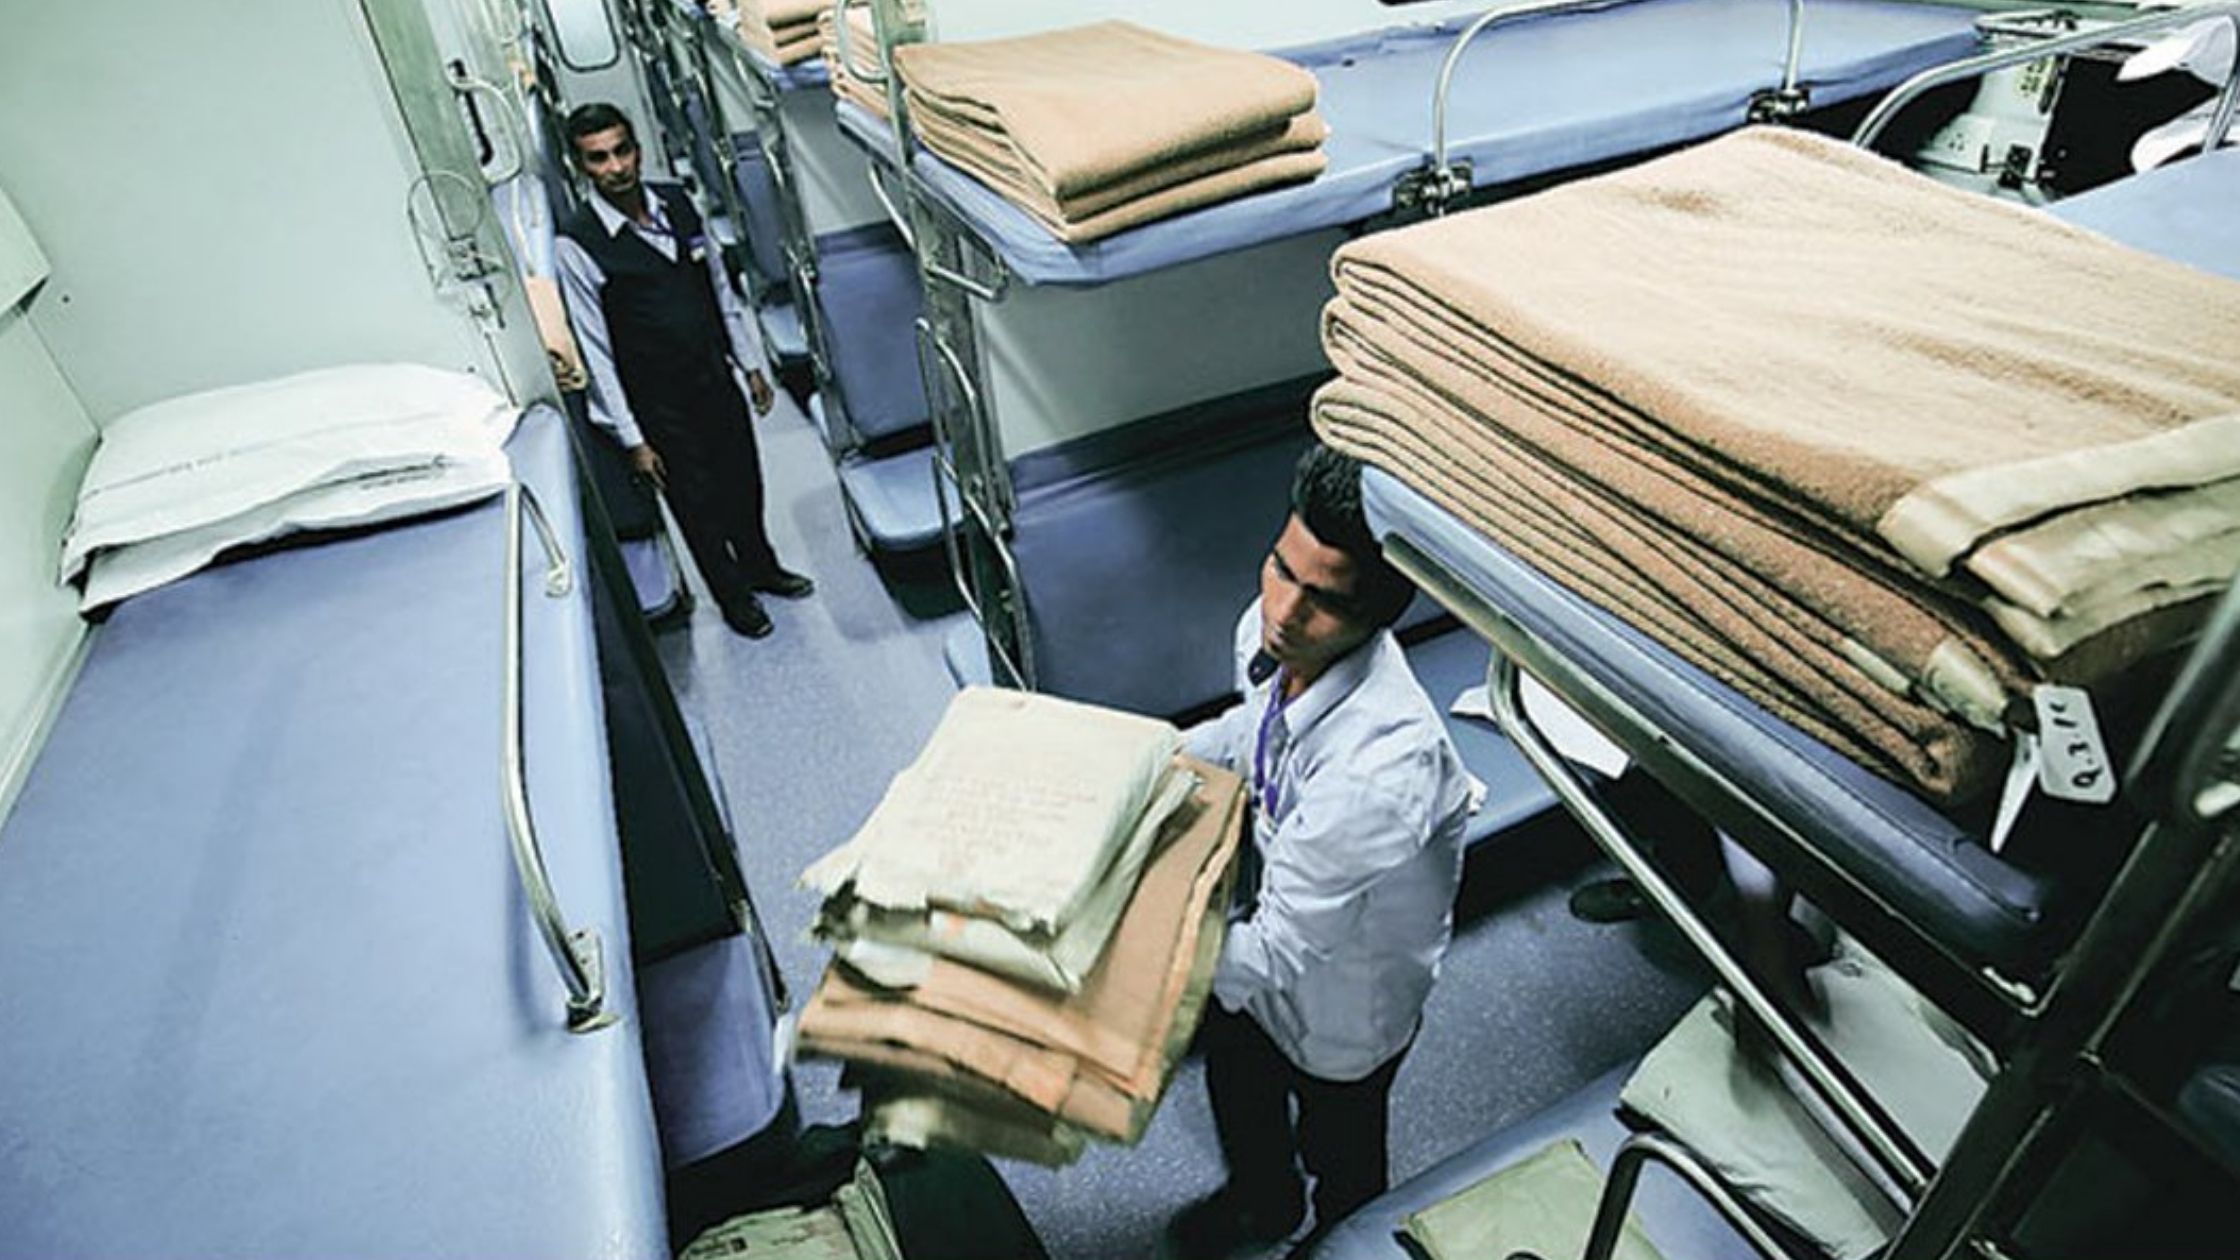 Rail passengers will get sheets blankets and towels again